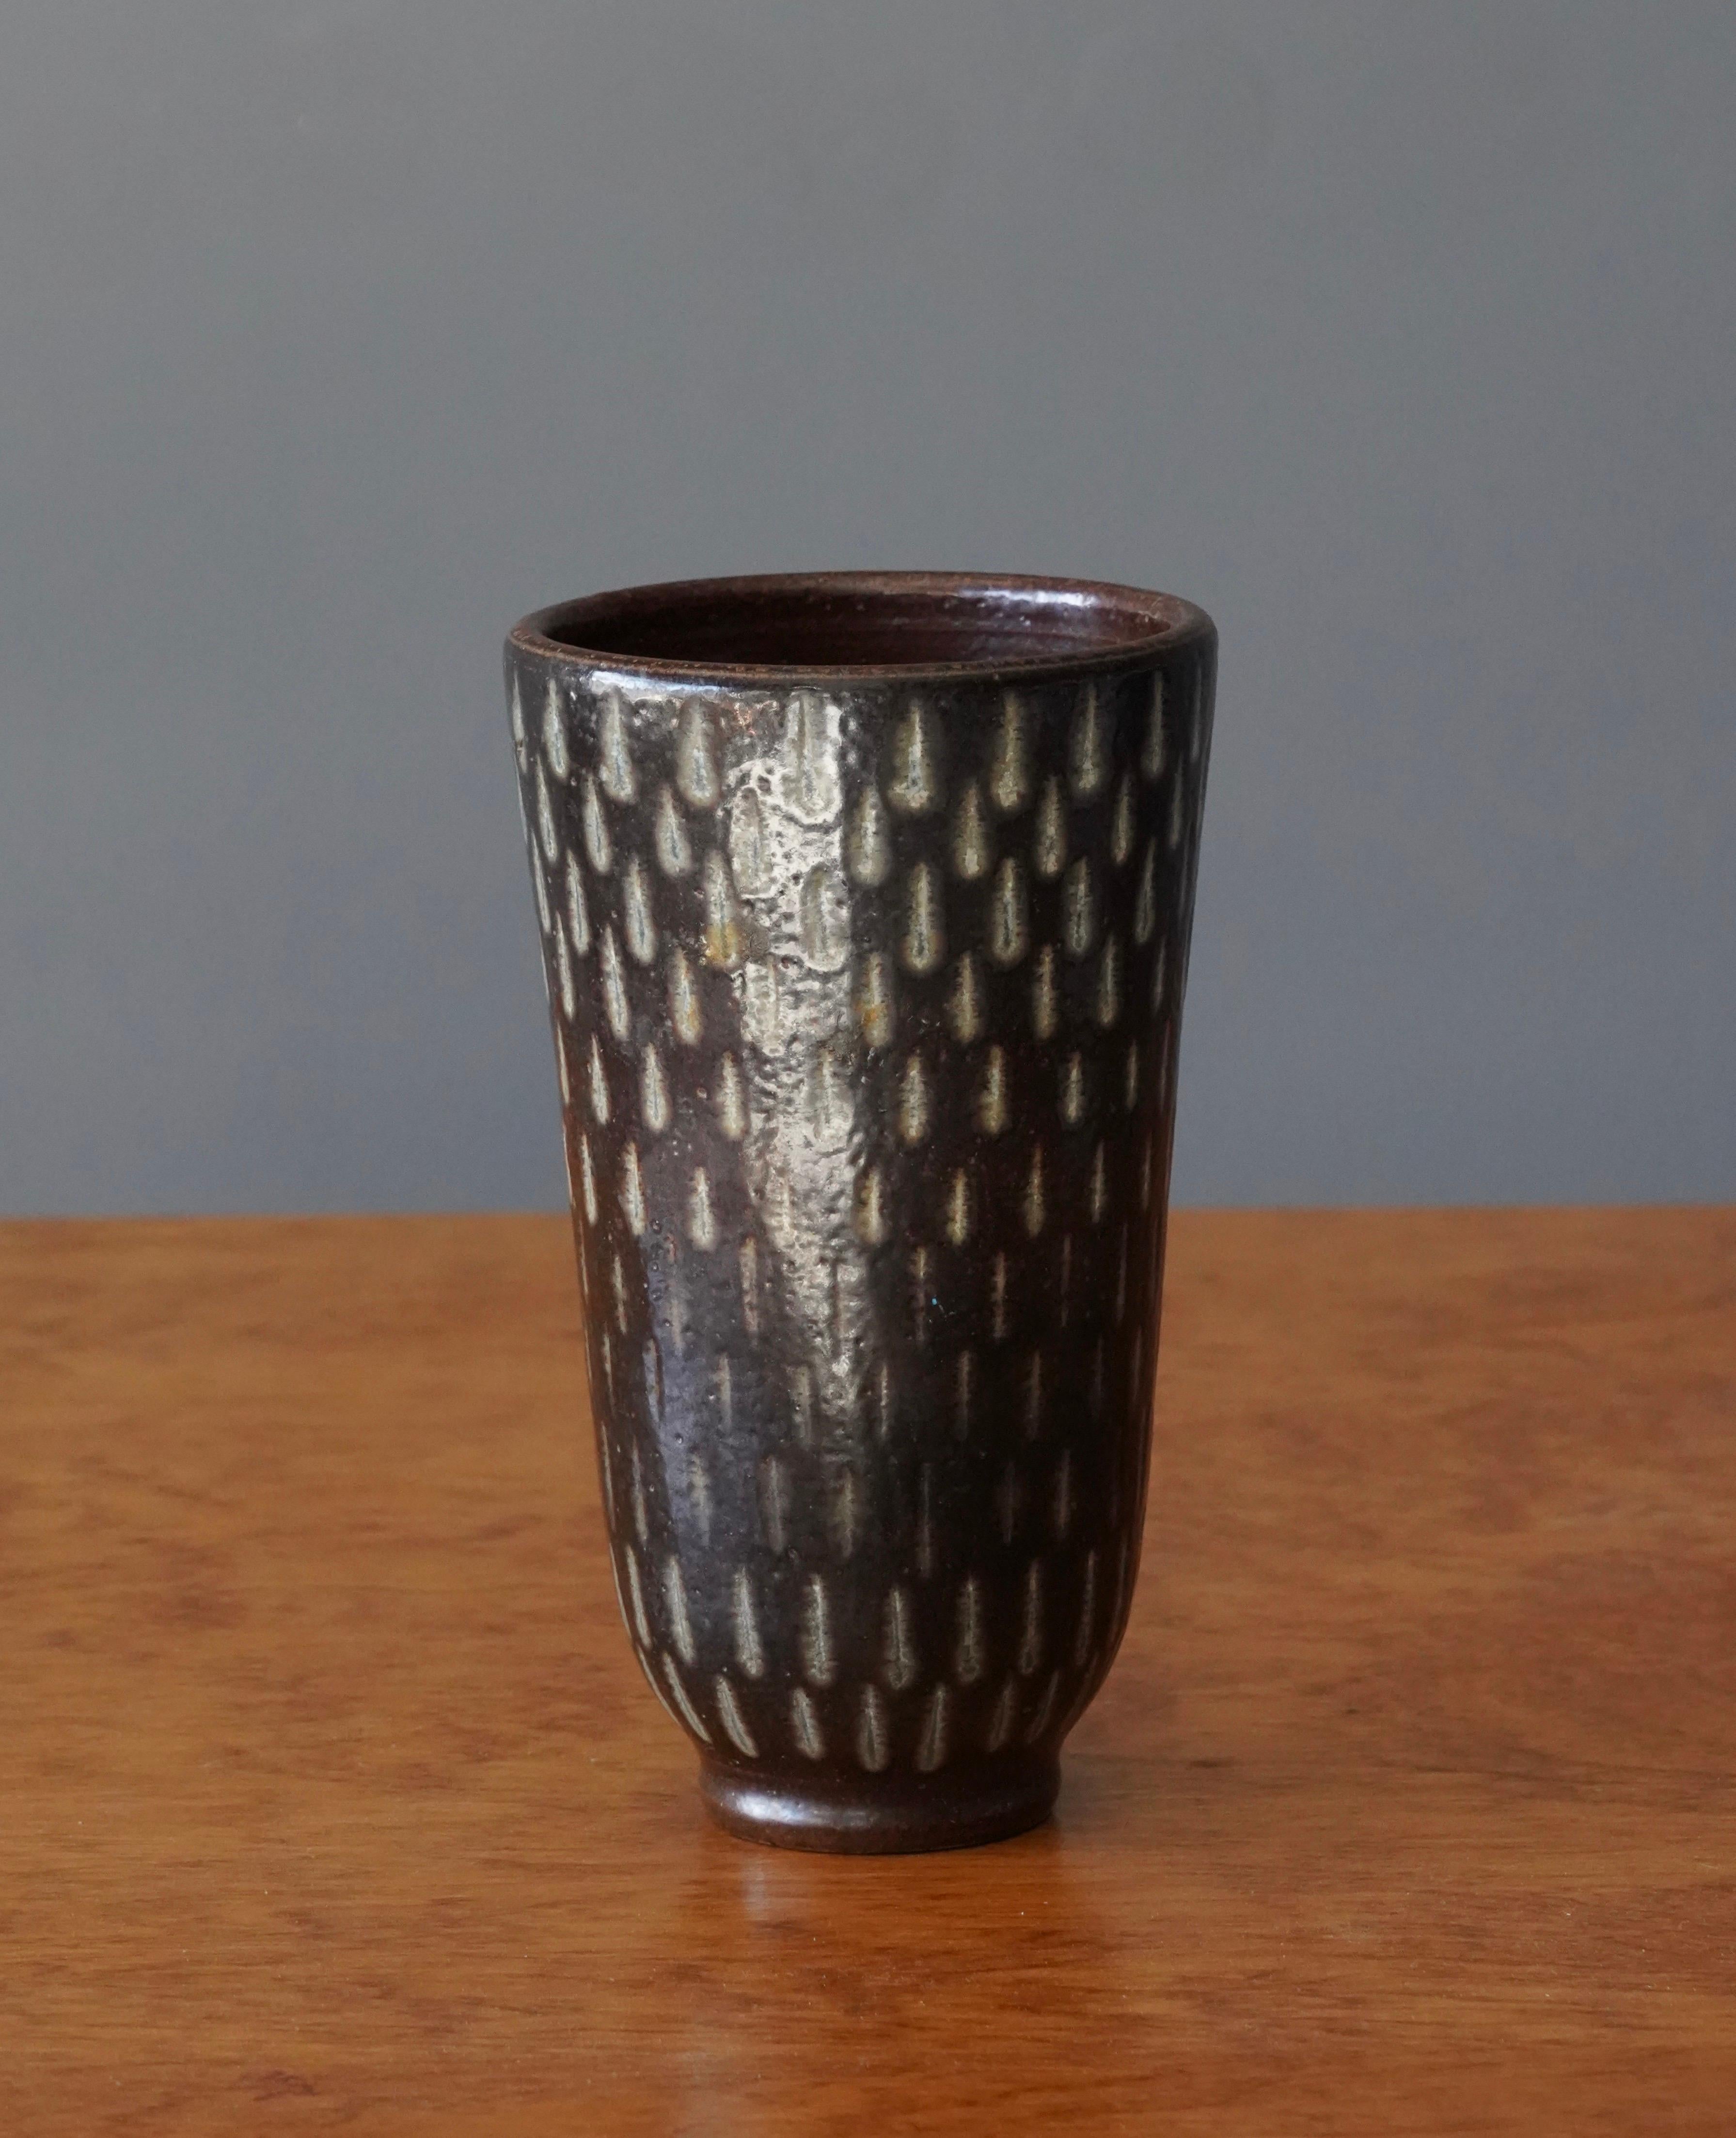 A vase, designed by Arthur Andersson, produced by Wallåkra Keramik, Sweden, 1950s.

Features fine incised ornamentation, brown and yellow salt glazed.

